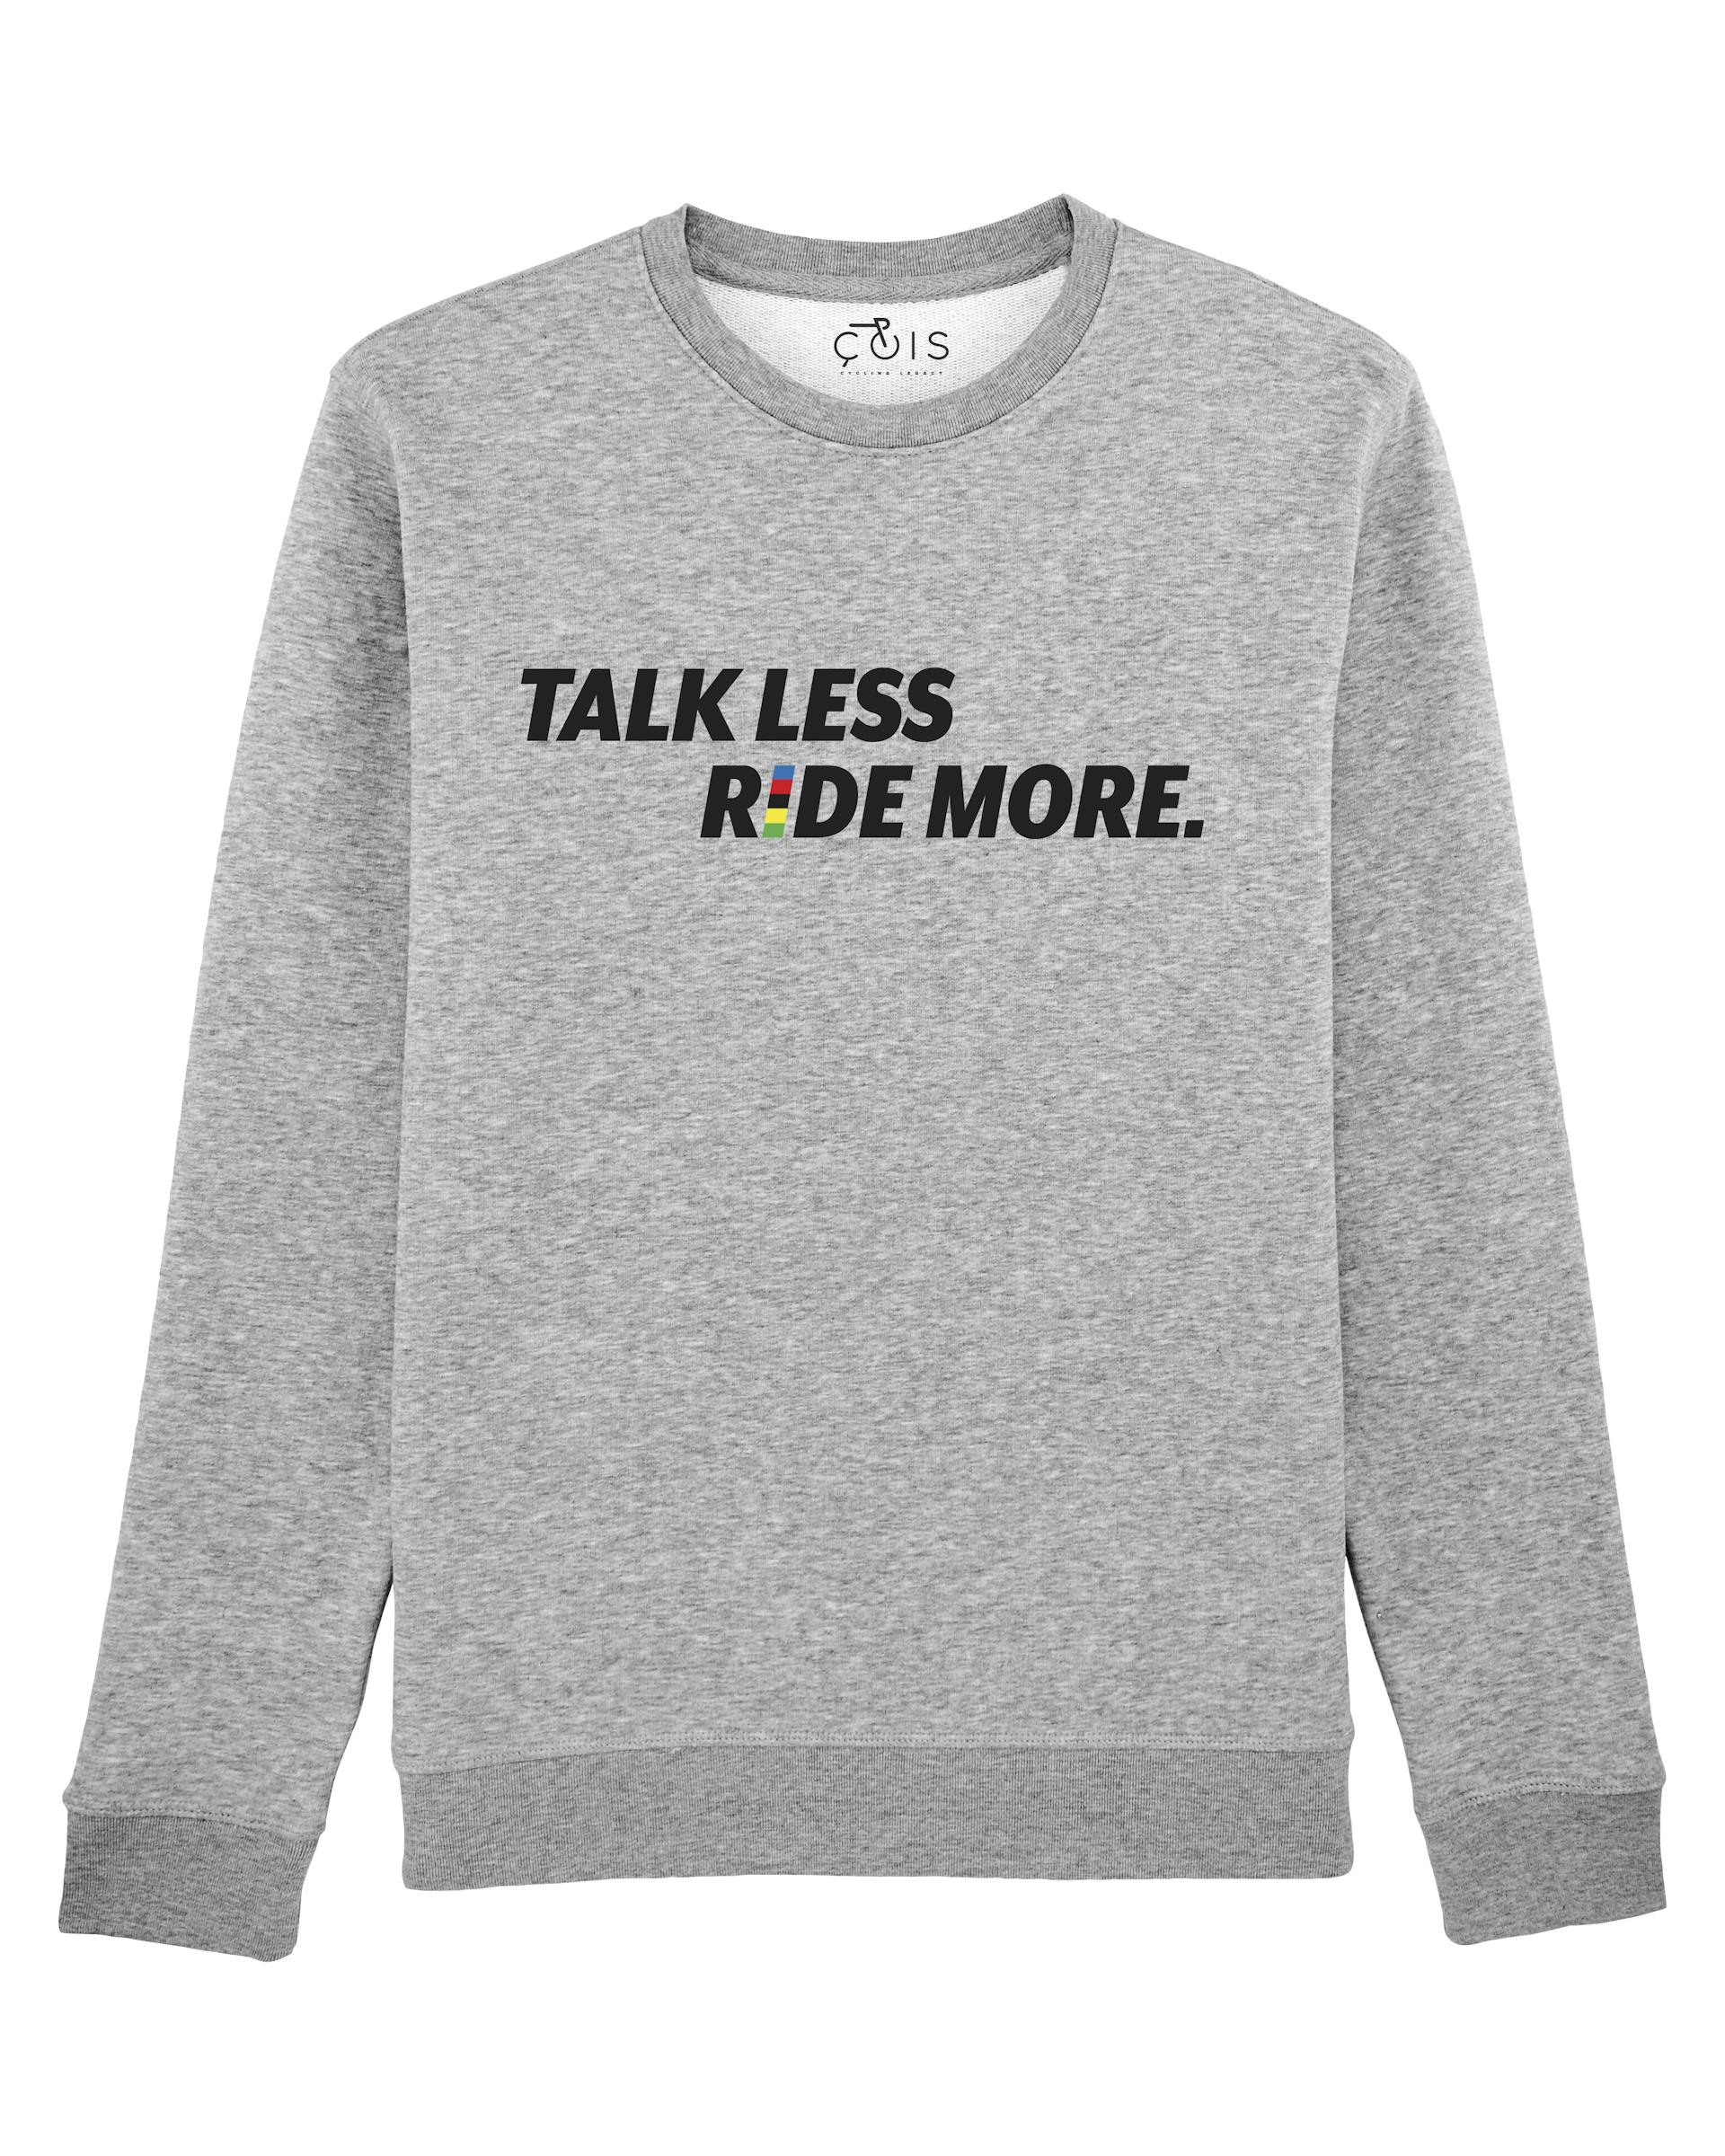 TALK LESS RIDE MORE Cycling Sweater